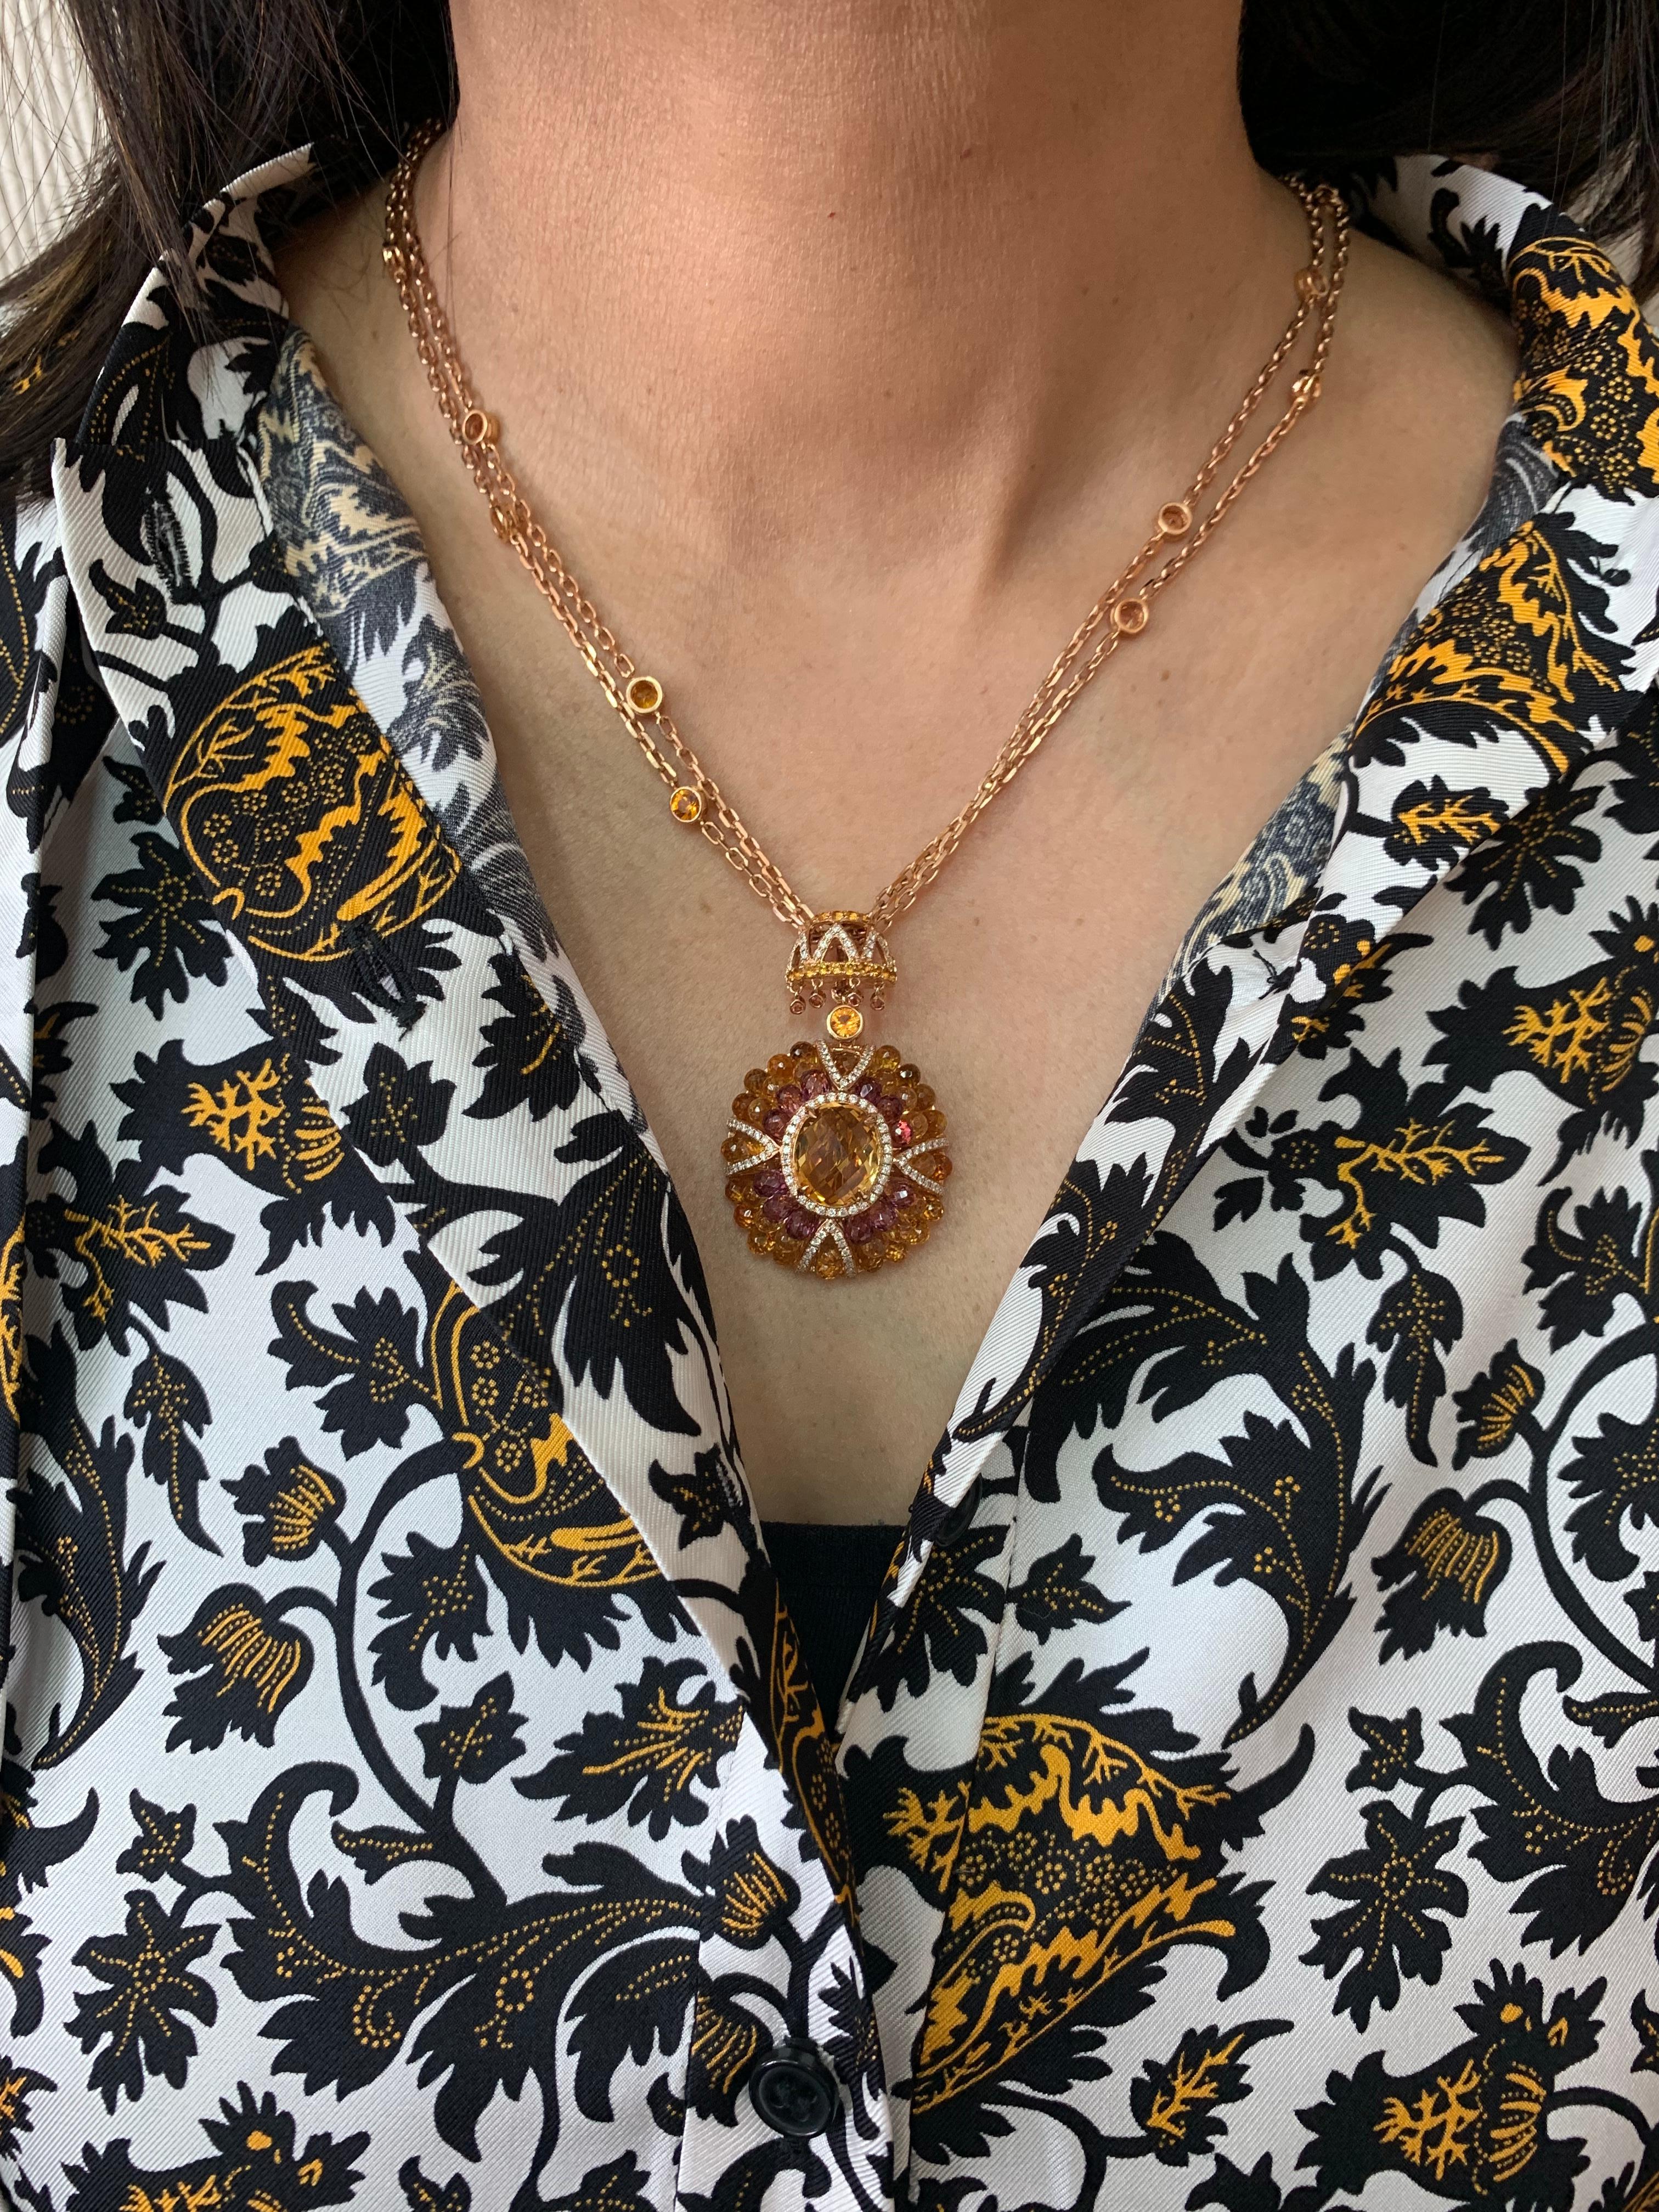 This is a chic citrine pendant necklace in a unique briollete cut to accentuate the colorful sparkle. The stunning center stone vibrantly sits on top of a cluster of beautiful citrine and rhodolite garnet drops. The unique architecture to construct